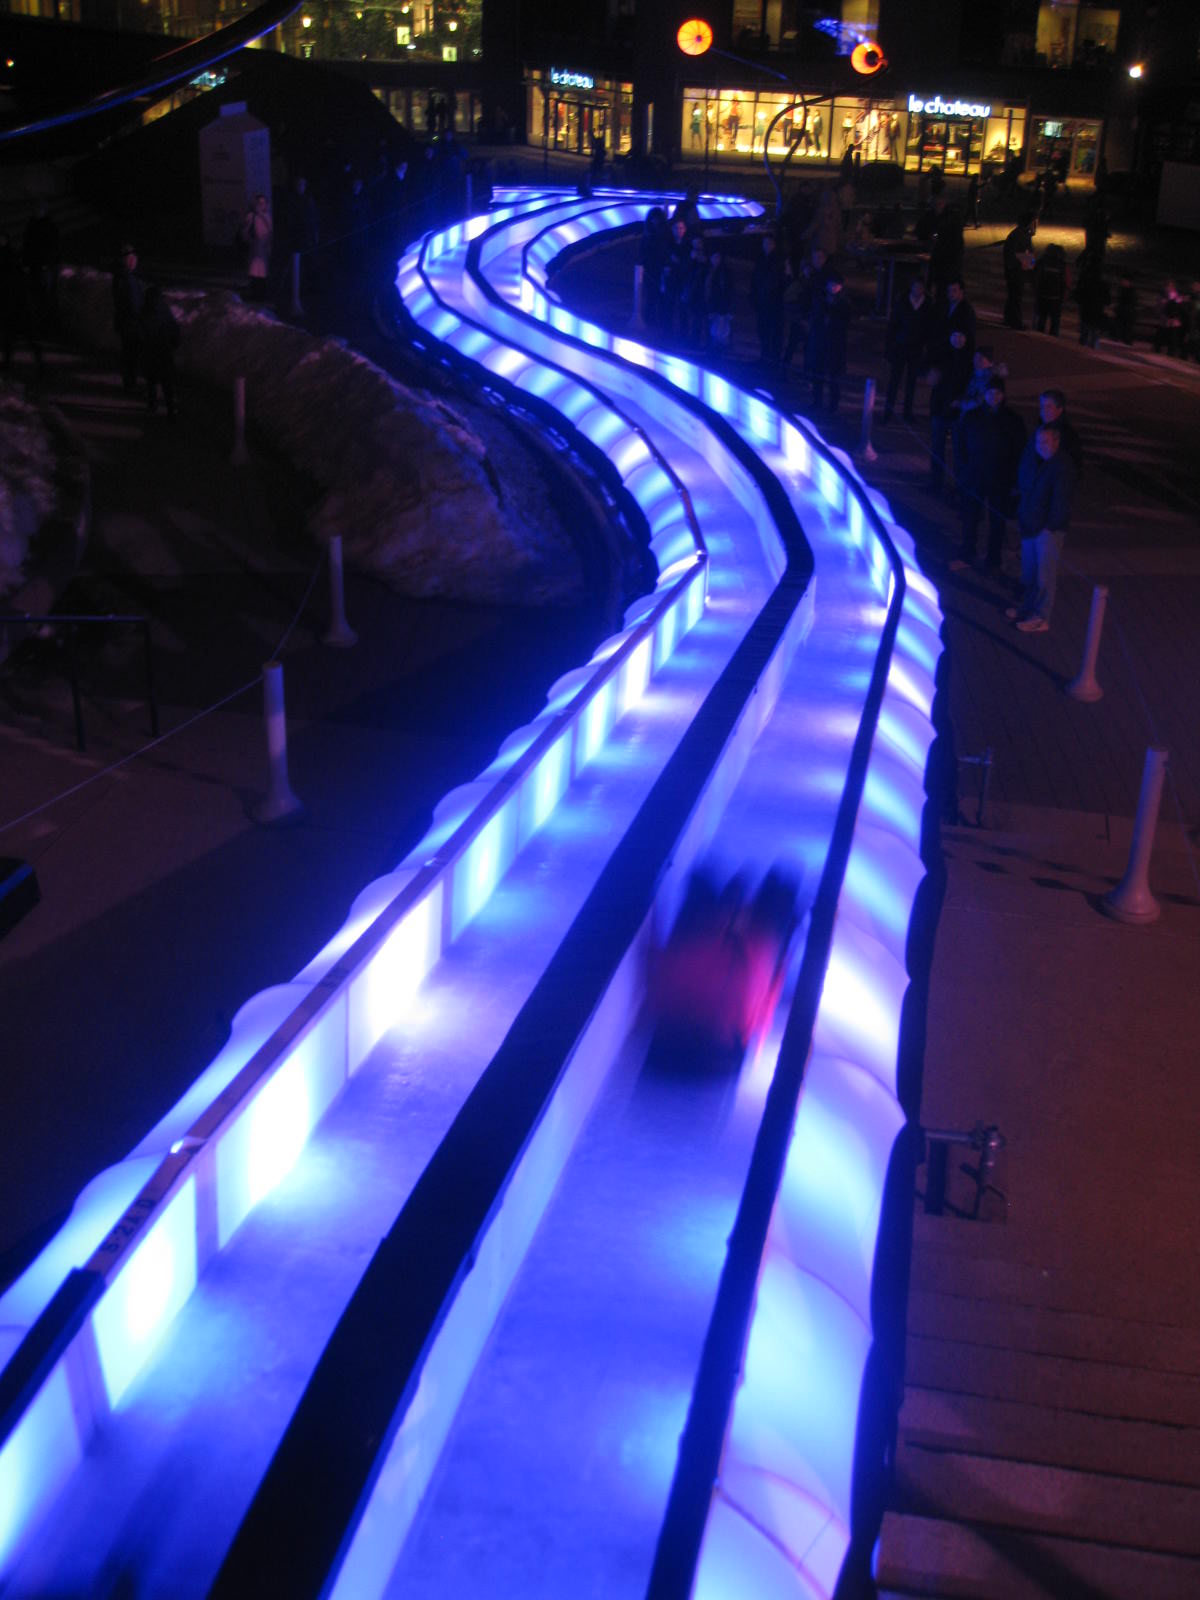 Montréal en lumière’s outdoor Urban Slide is like riding the luge in the Winter Olympics!